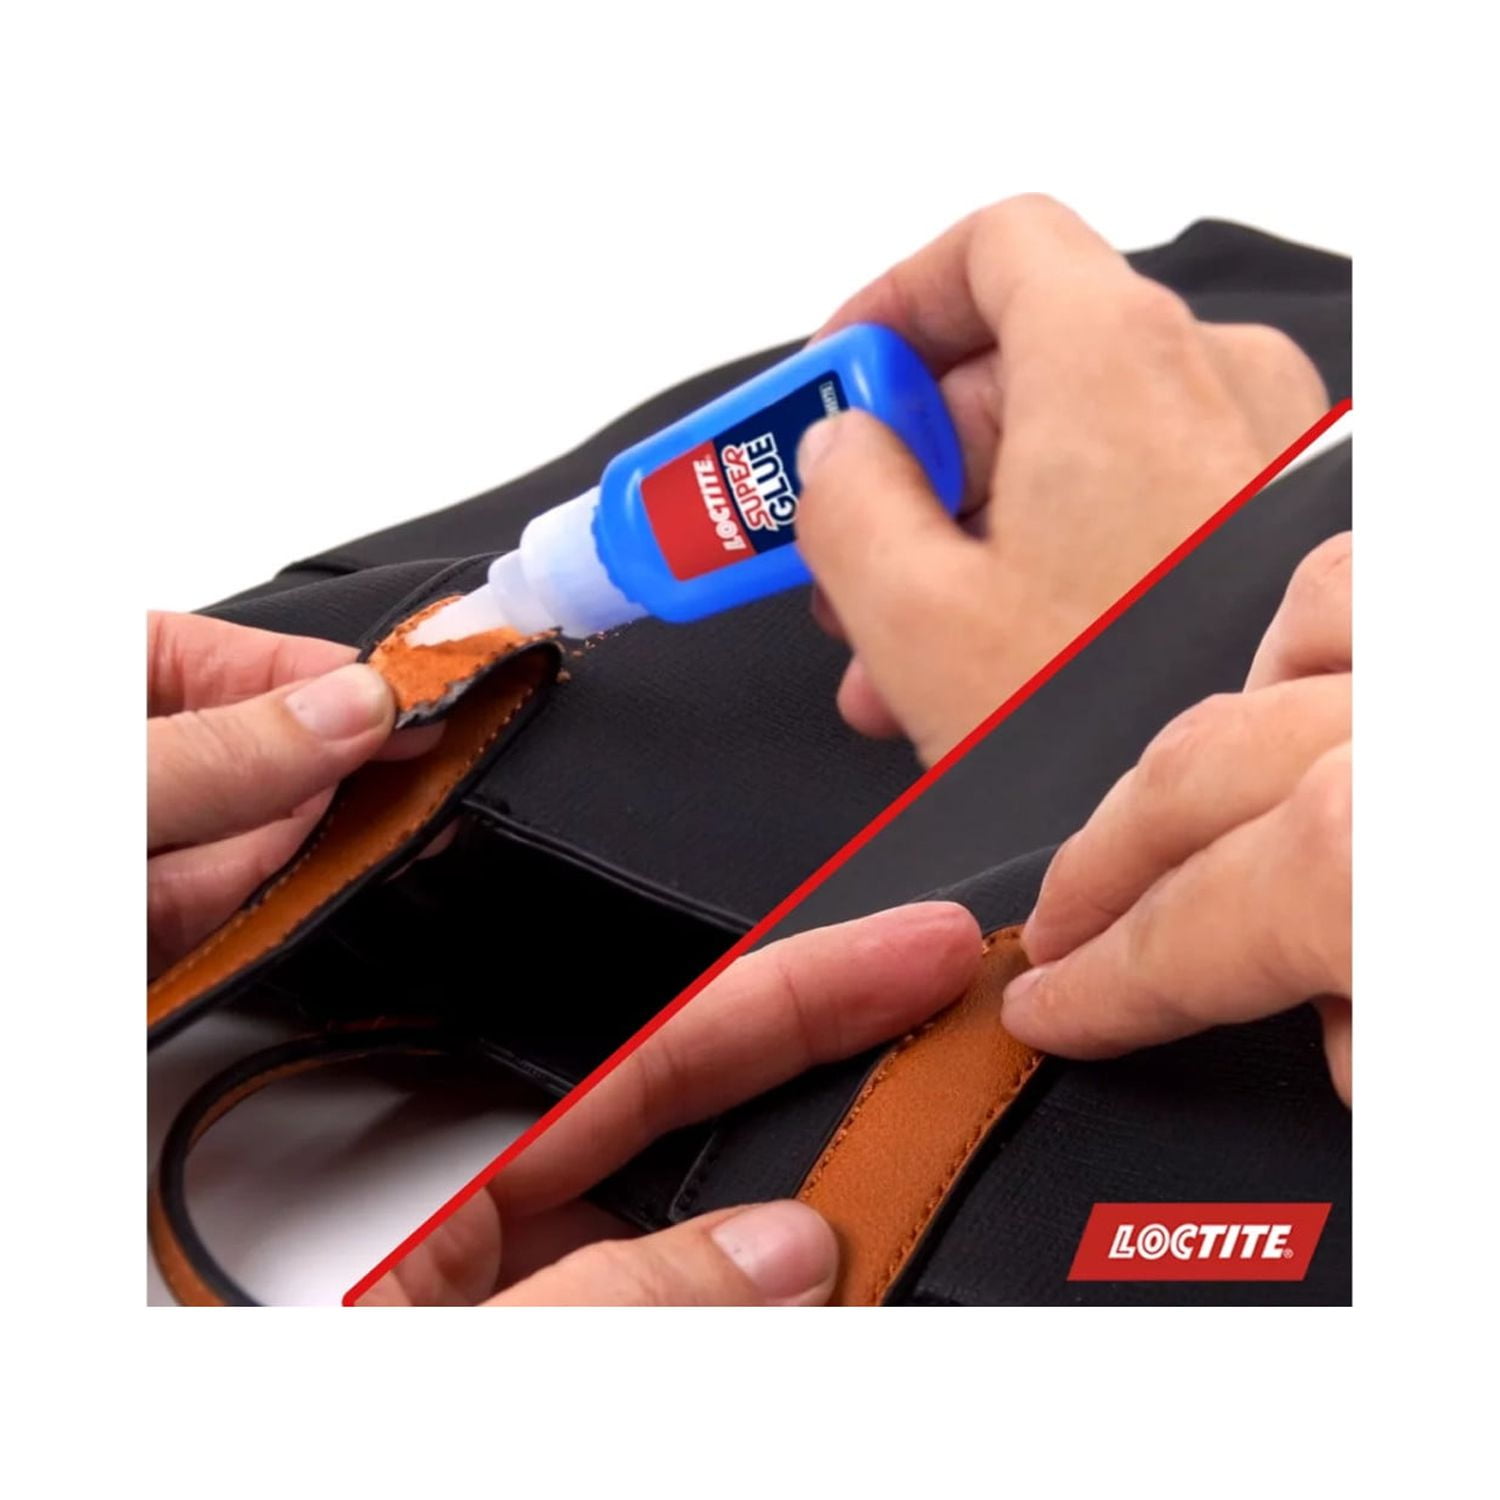 Loctite Super Glue-3 Precision - super strong instant glue - bottle with  extra long nozzle - Schleiper - Complete online catalogue